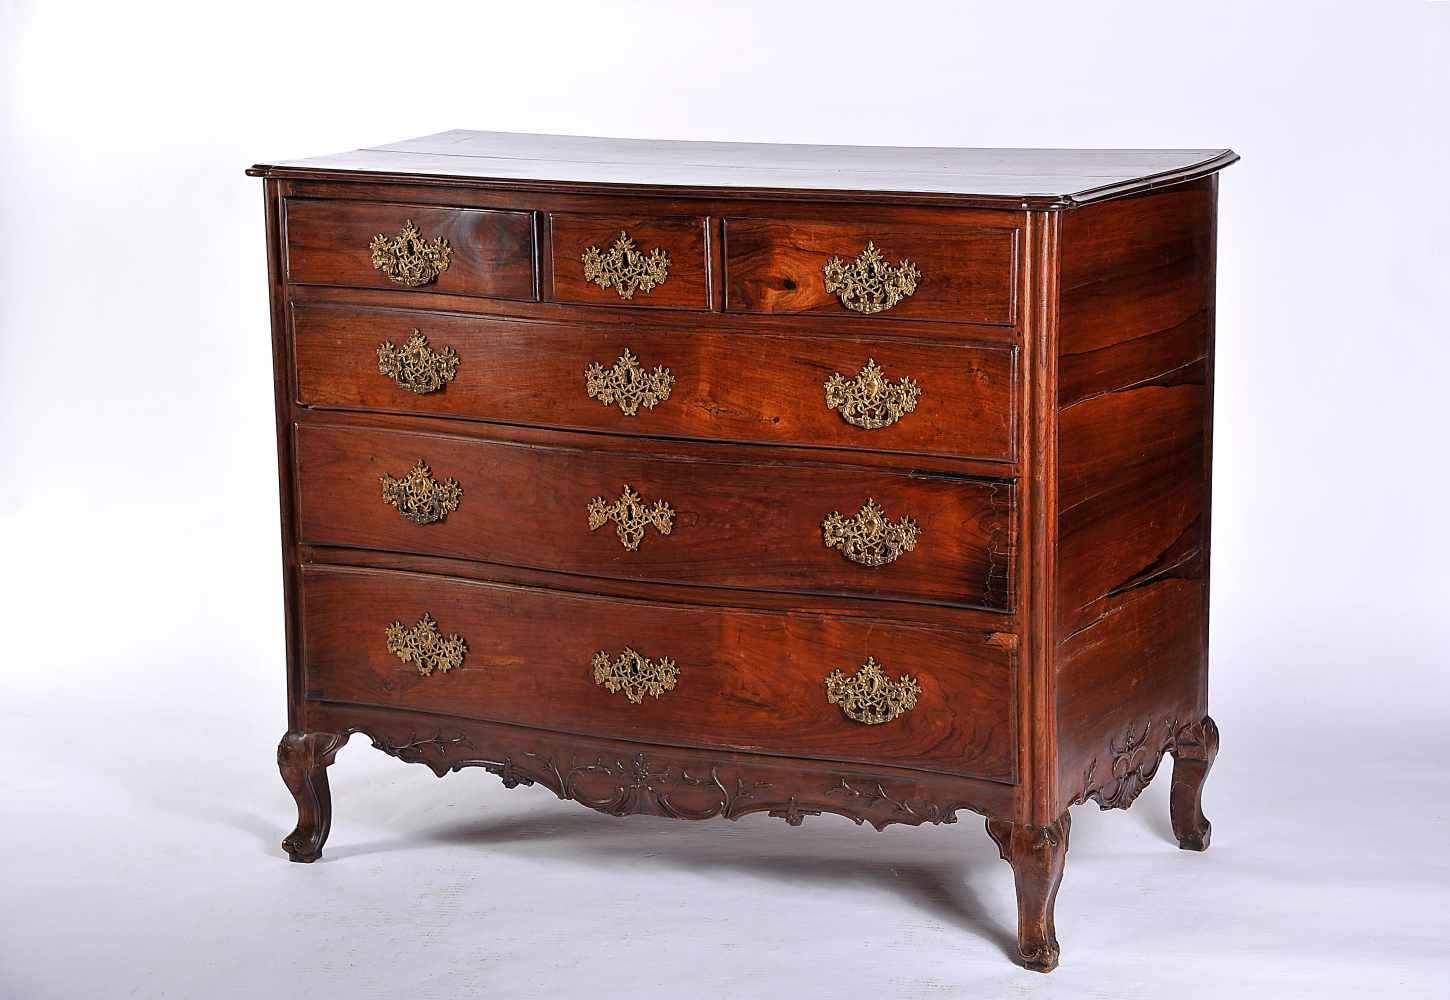 A Chest of Drawers, D. José I, King of Portugal (1750-1777), carved Brazilian rosewood, scalloped, - Image 2 of 2